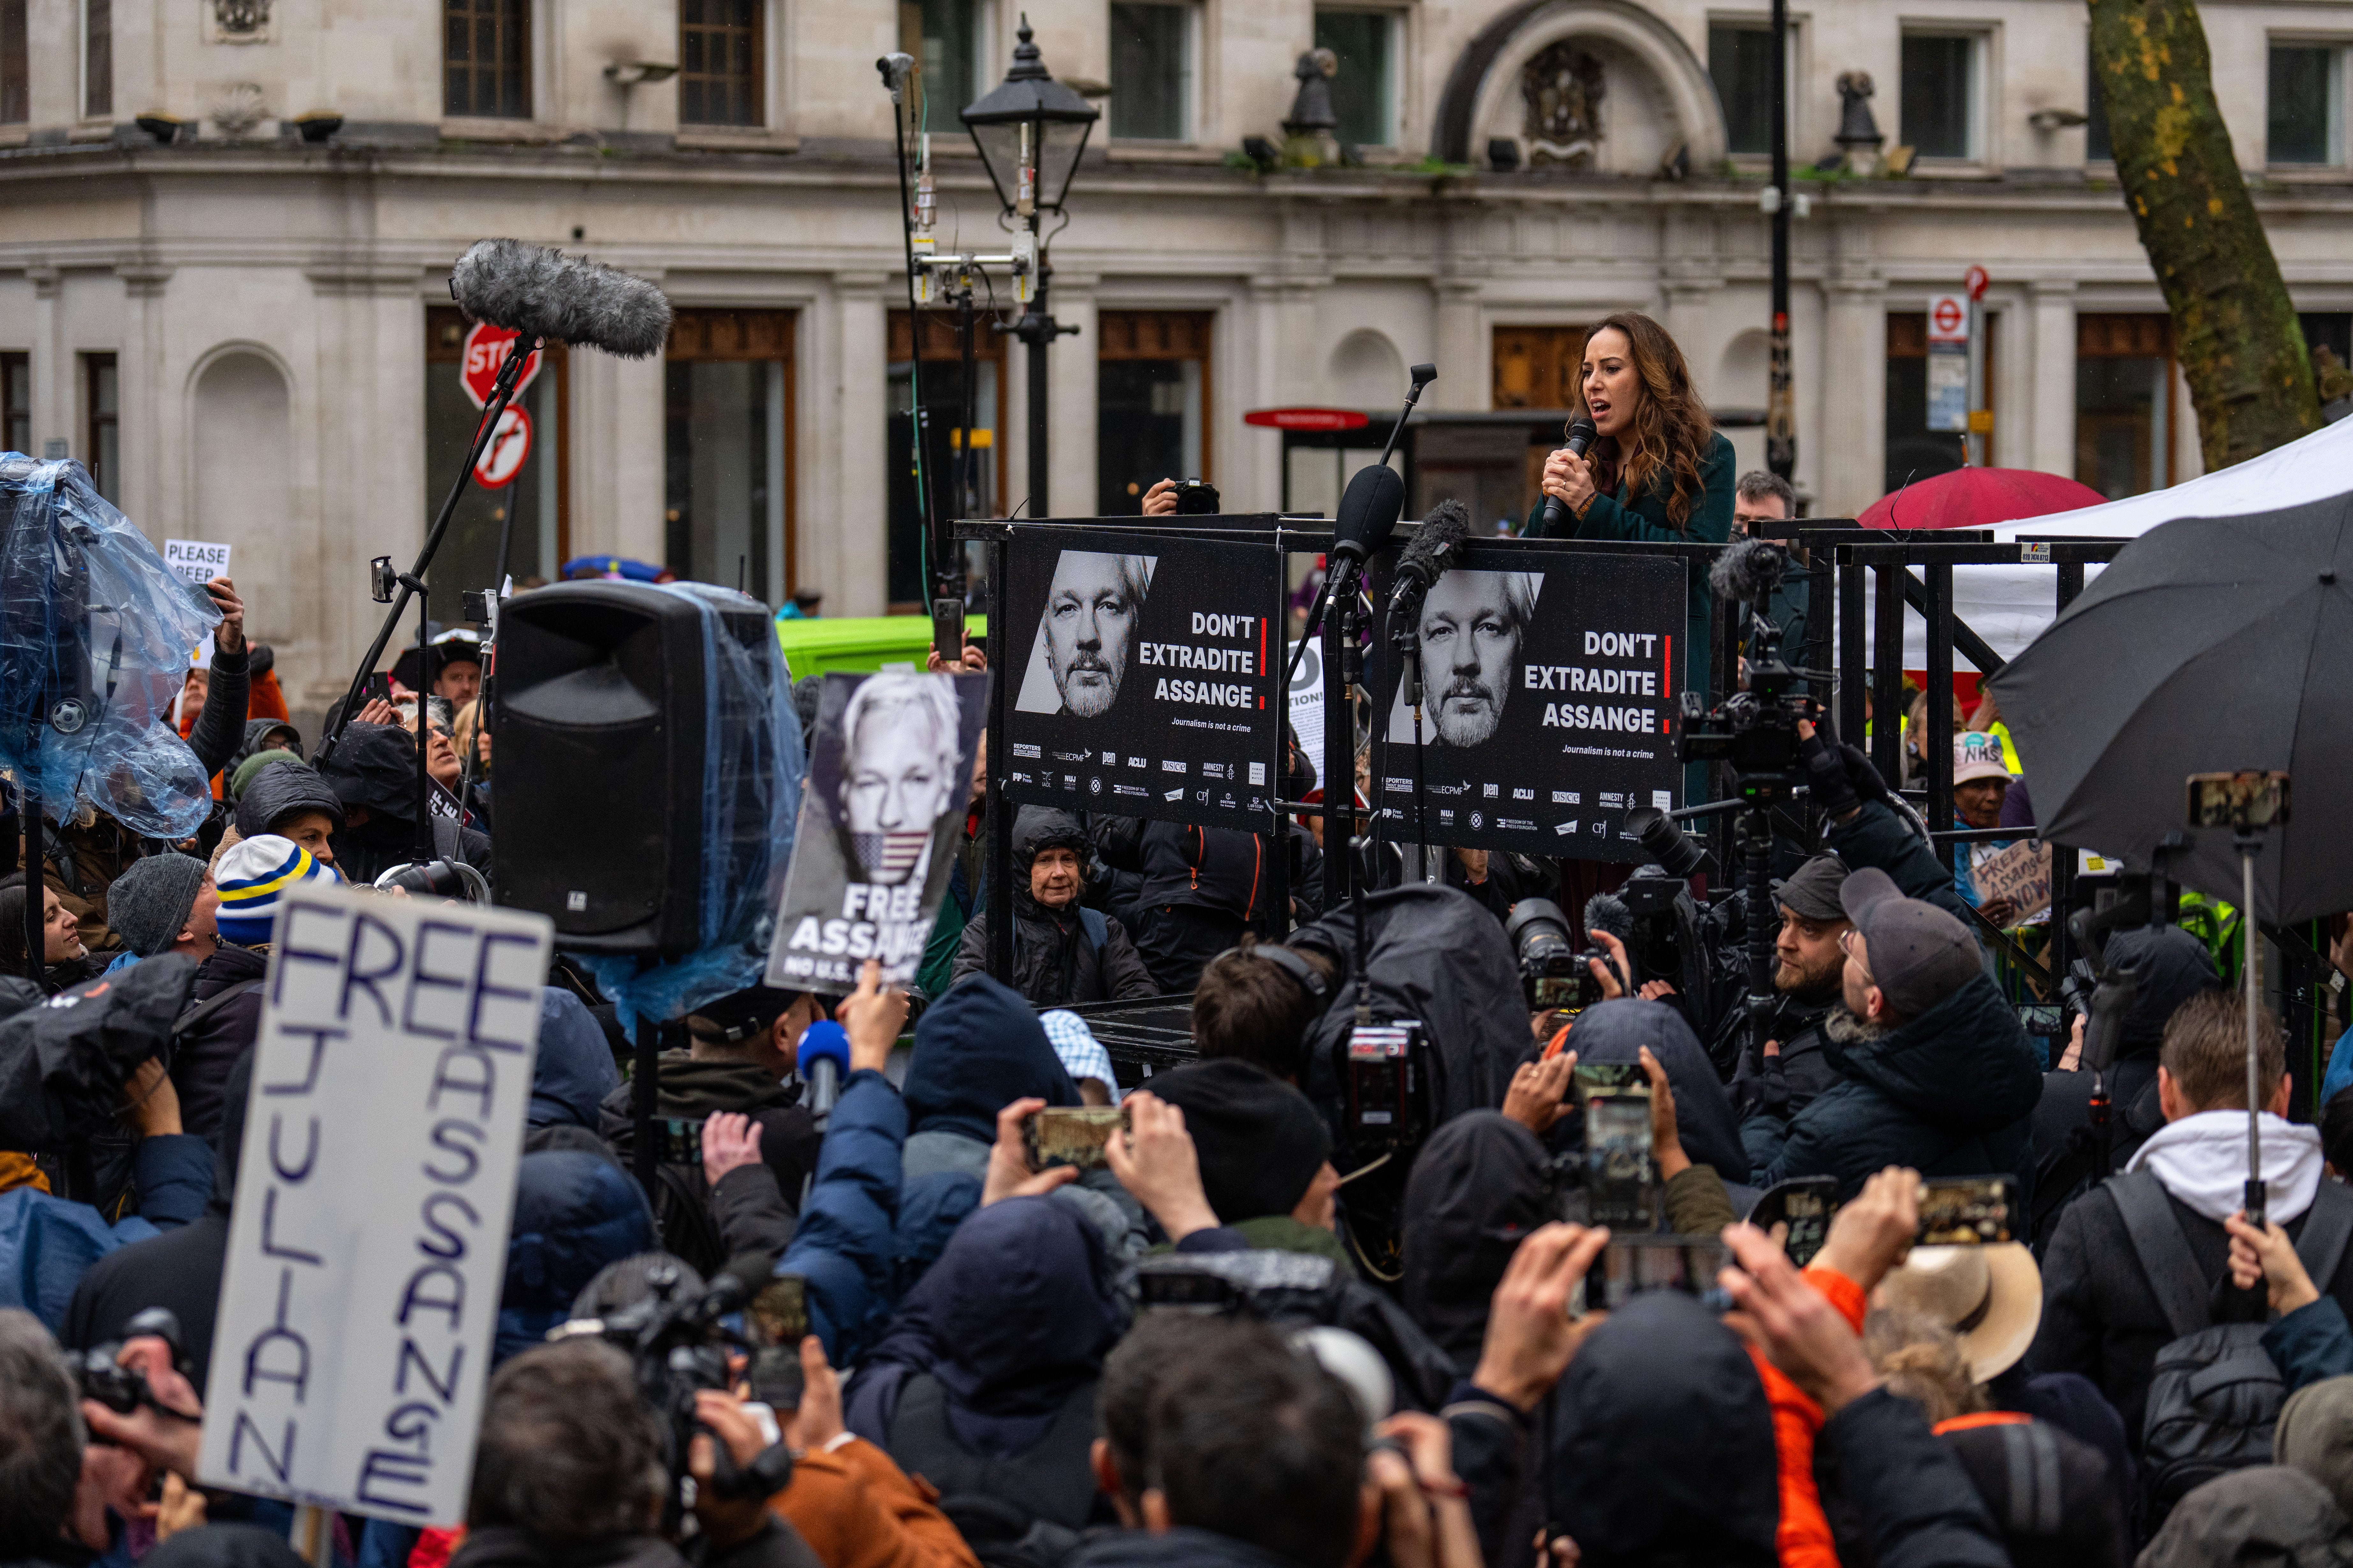 Stella Assange addressed crowds of supporters outside the High Court in London